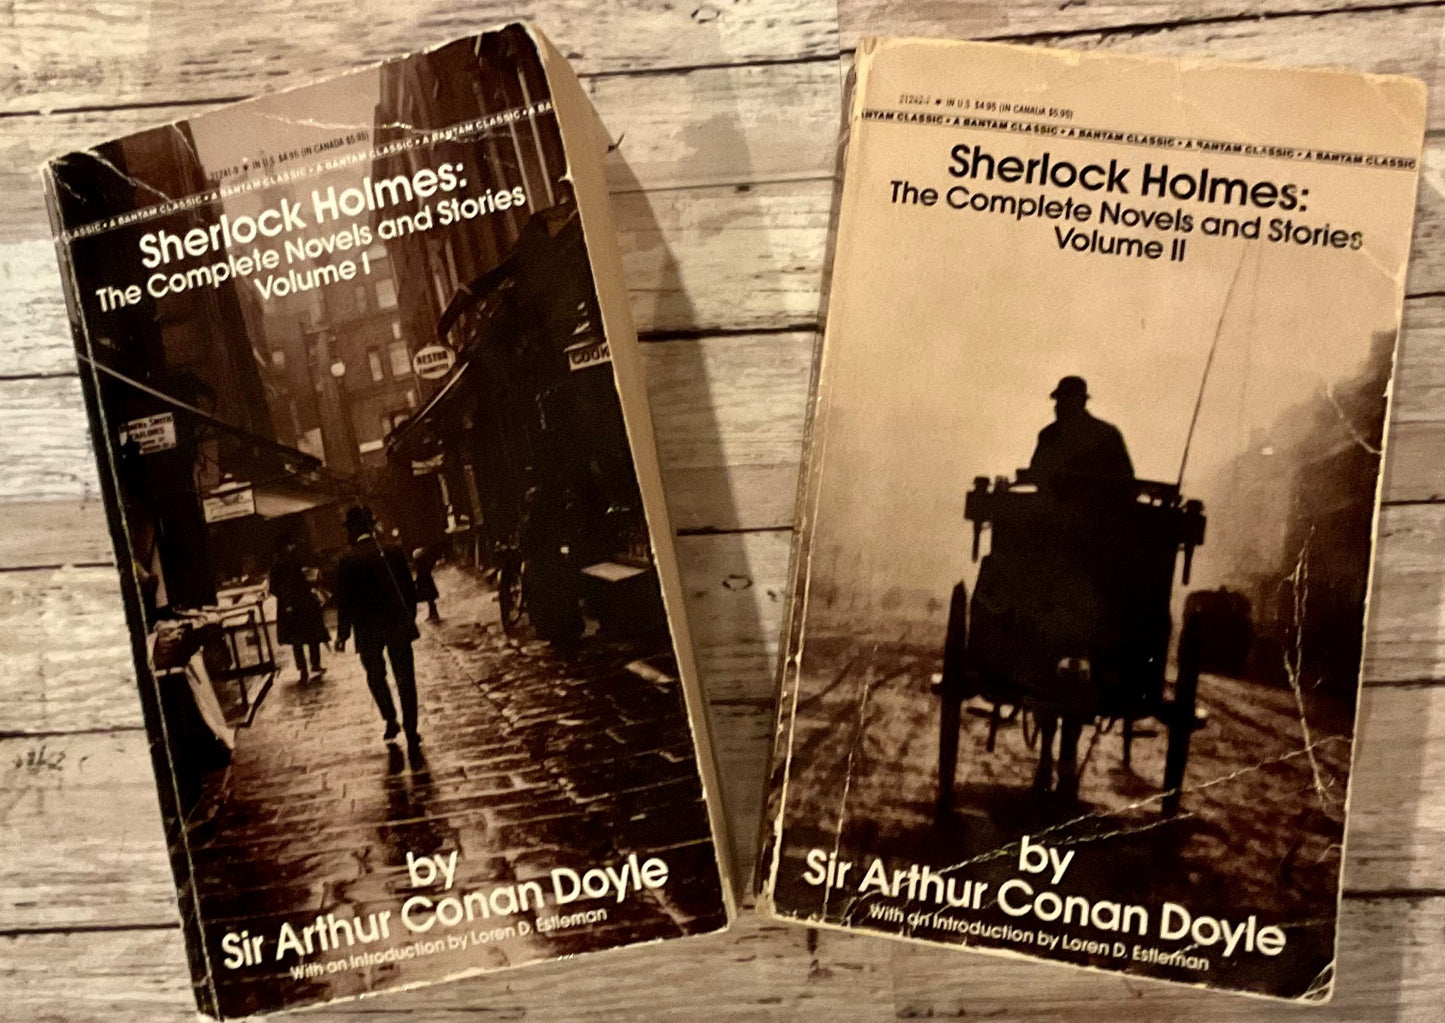 Sherlock Holmes: The Complete Novels and Stories Volume I and II - Anchored Homeschool Resource Center